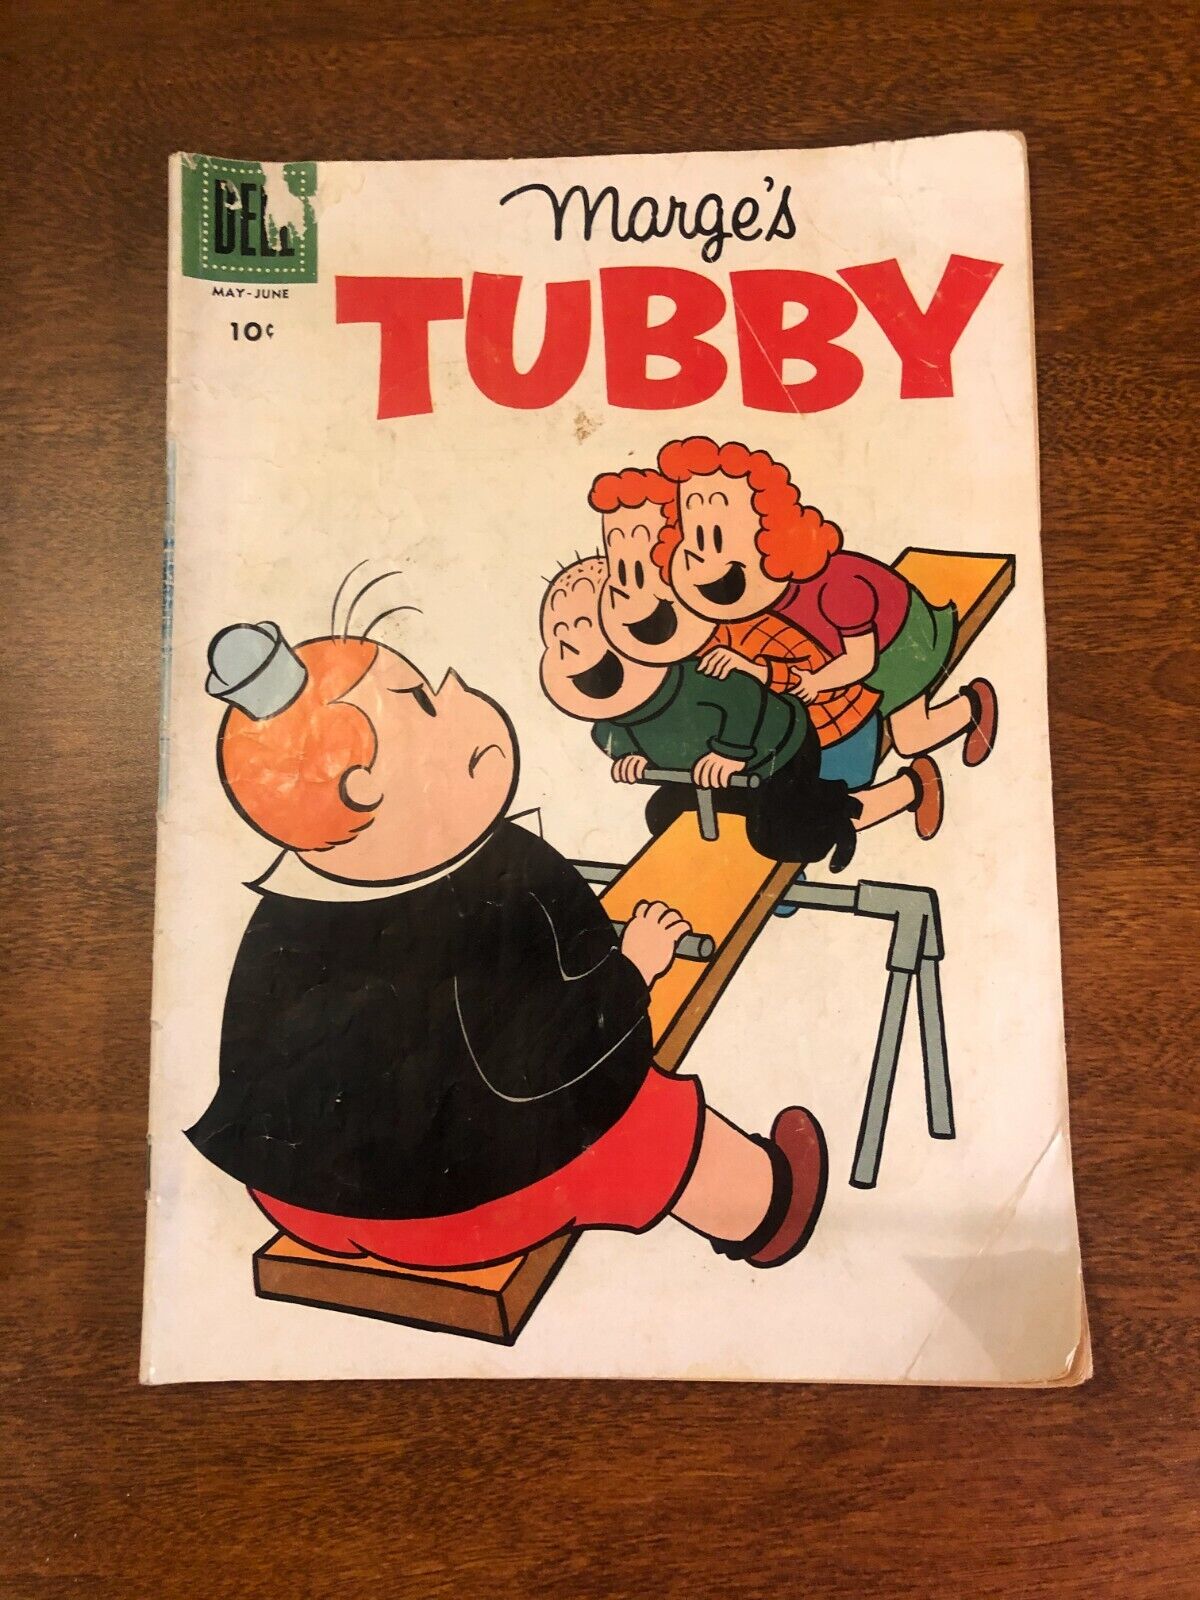 COLLECTIBLE DELL MARGES TUBBY COMIC CARTOON BOOK NO 28 MAY JUNE 1958 SILVER AGE